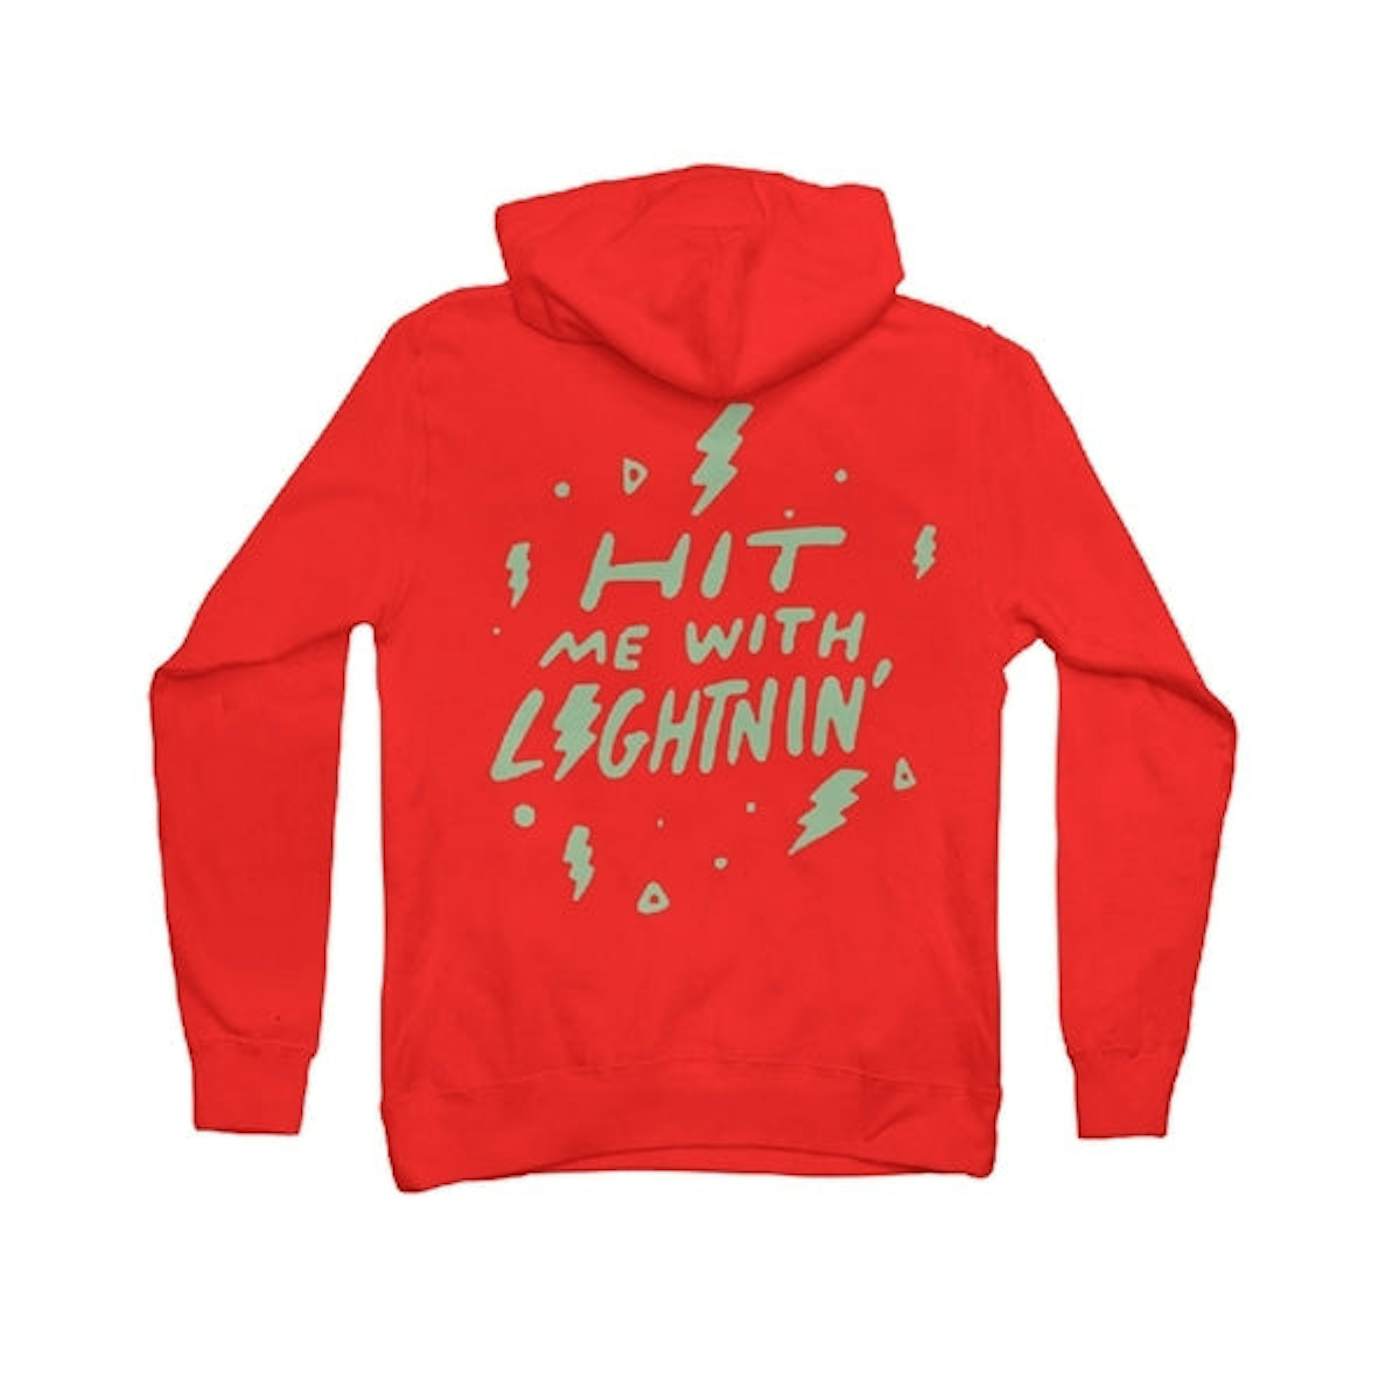 Paramore Hoodie - Marked Up